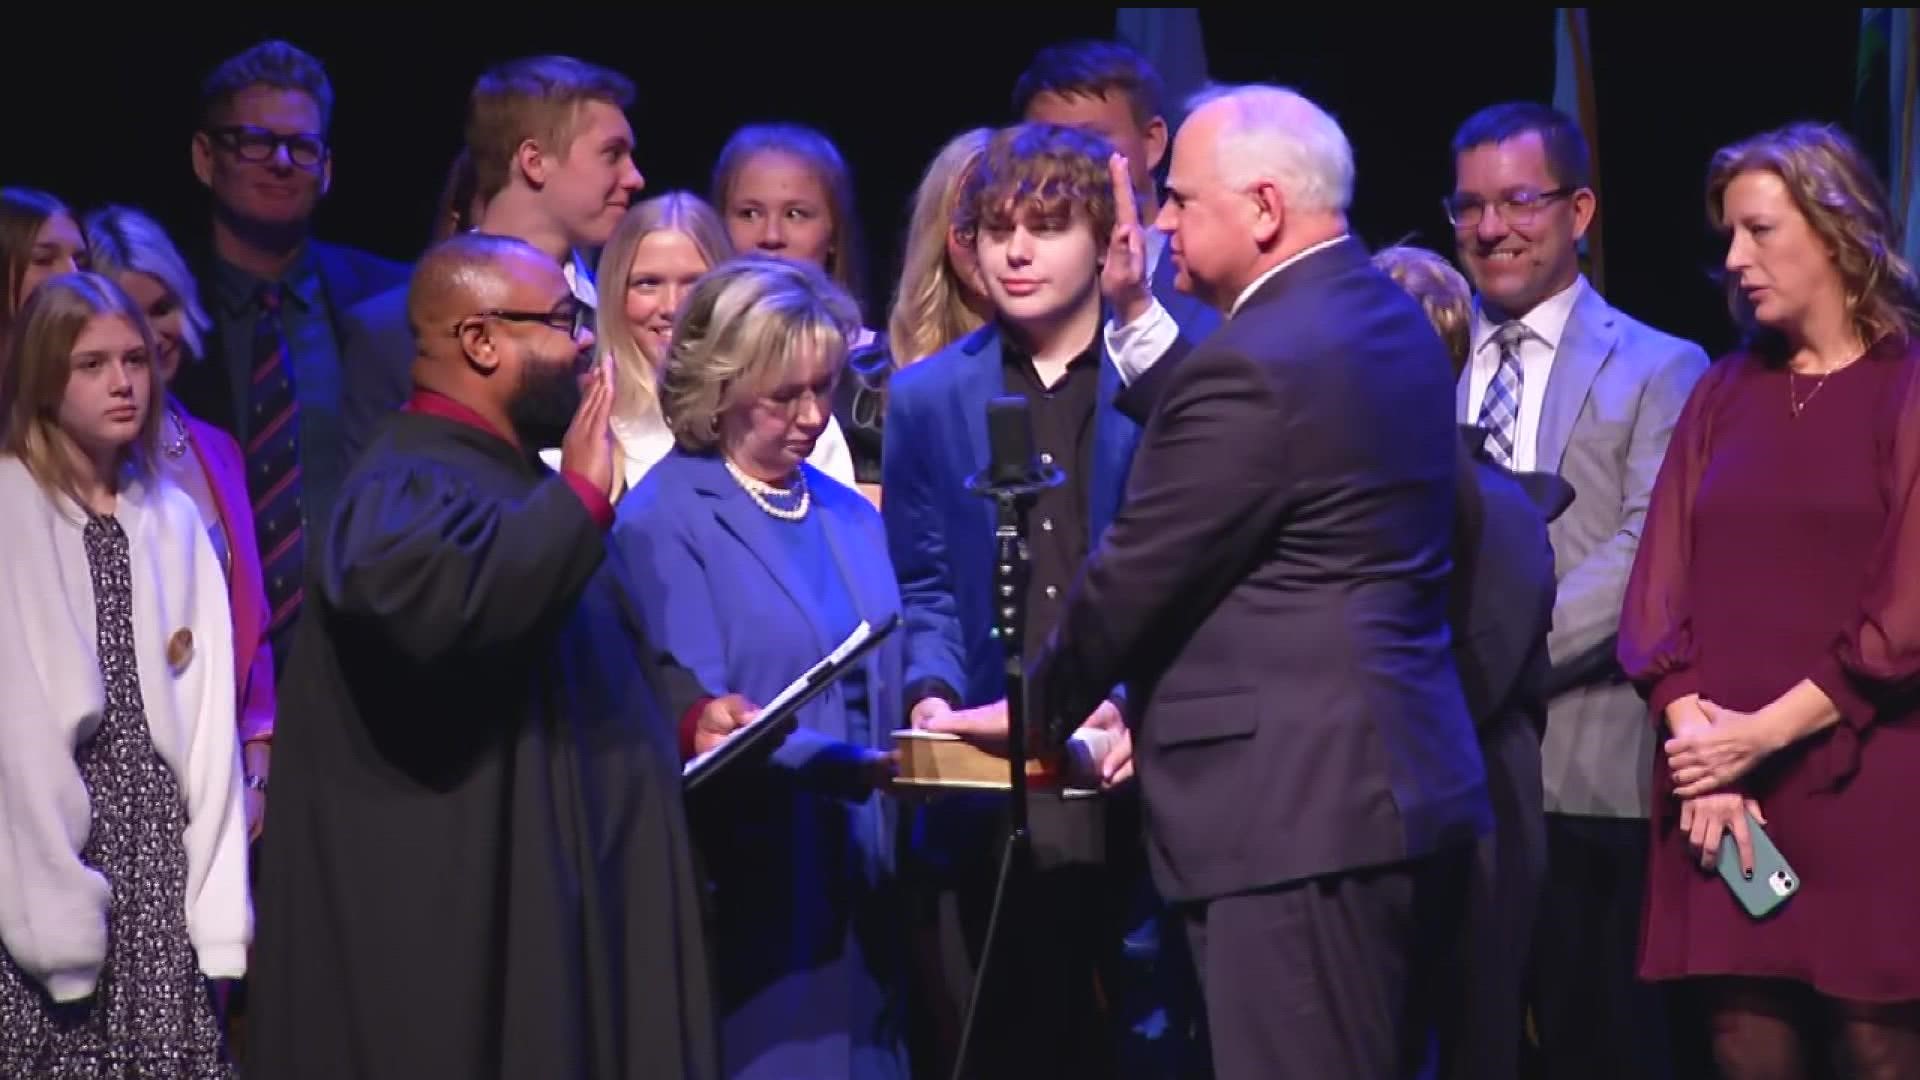 At Fitzgerald Theater inauguration ceremony, Gov. Walz was sworn in for a new term, along Lt Gov Flanagan, Atty Gen Ellison, Sec of State Simon, and Auditor Blaha